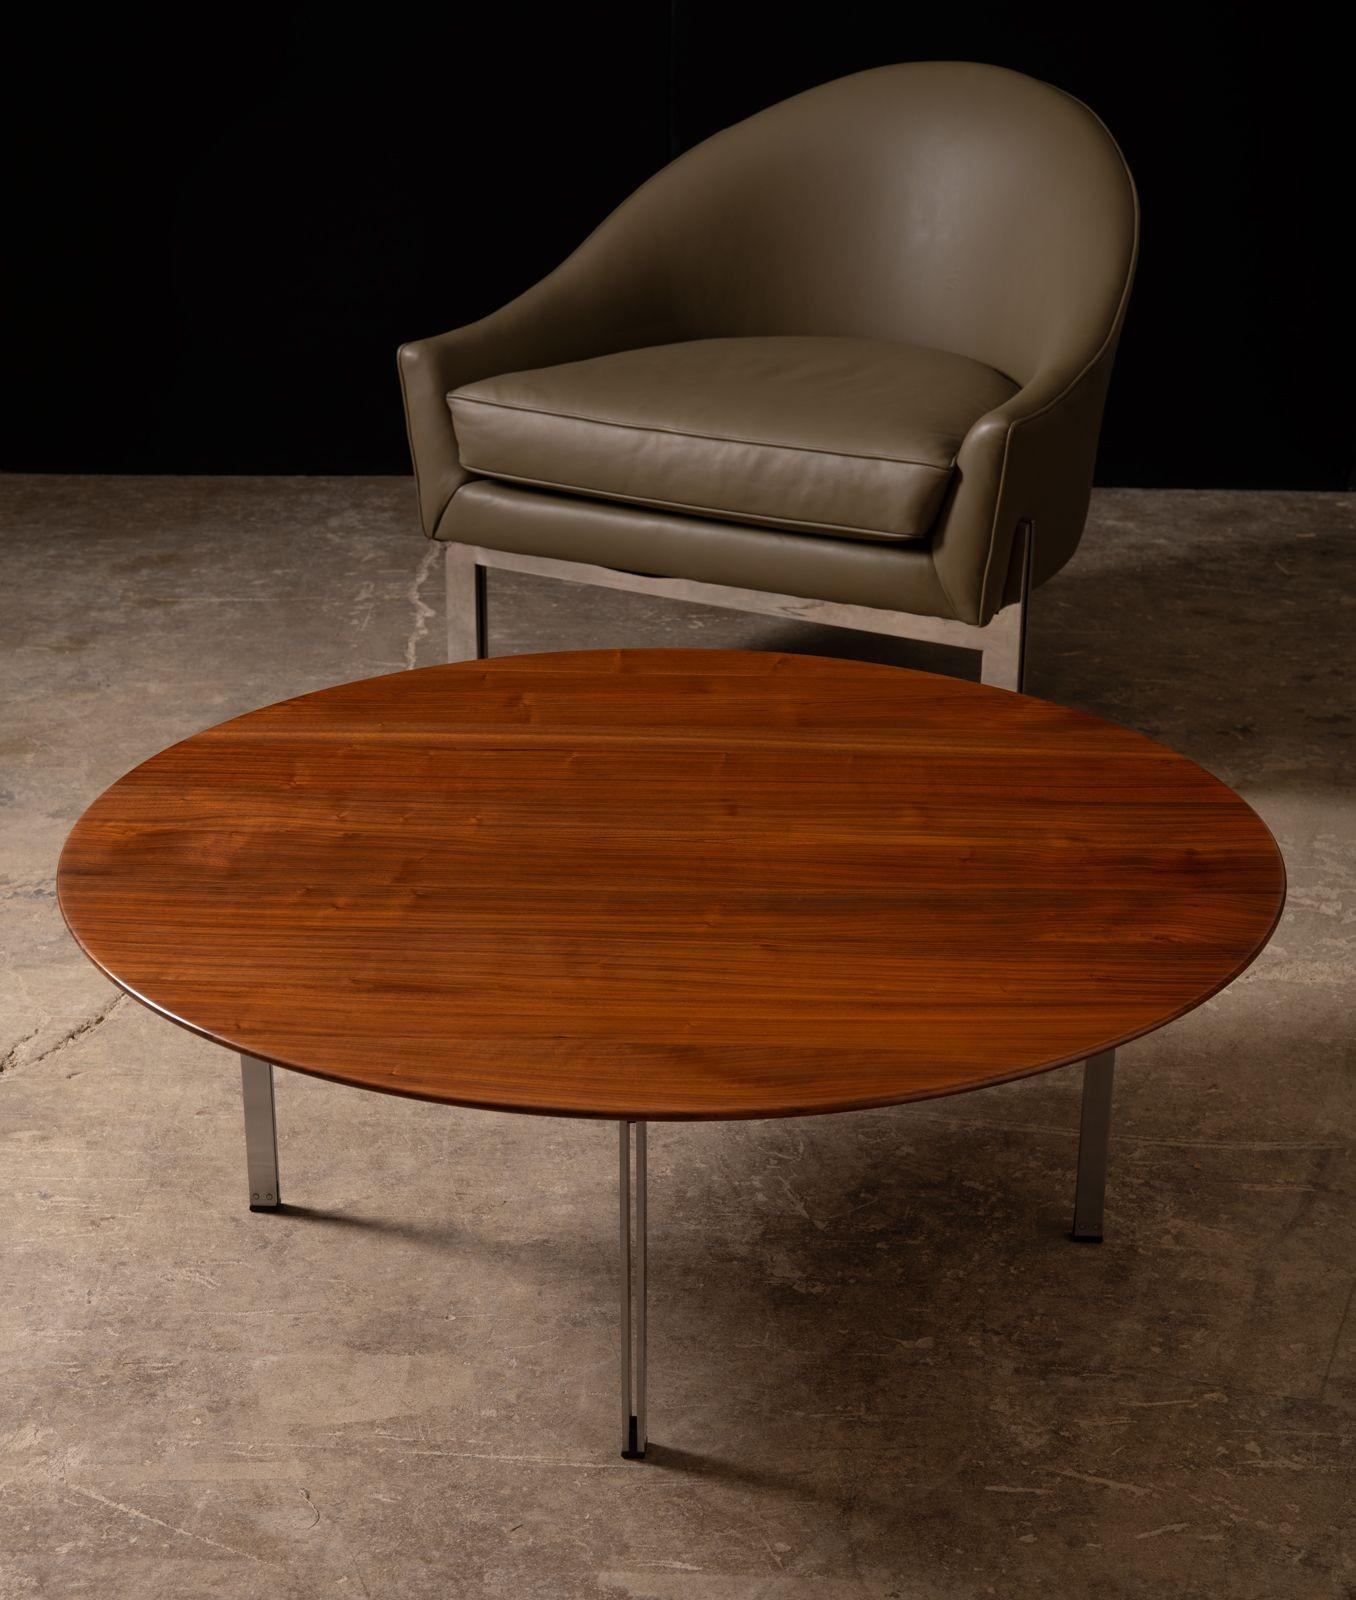 Early production Florence Knoll designed parallel bar cocktail table with a solid wood top and satin steel legs.
Restored to the highest possible standard.
Very heavy and substantial.